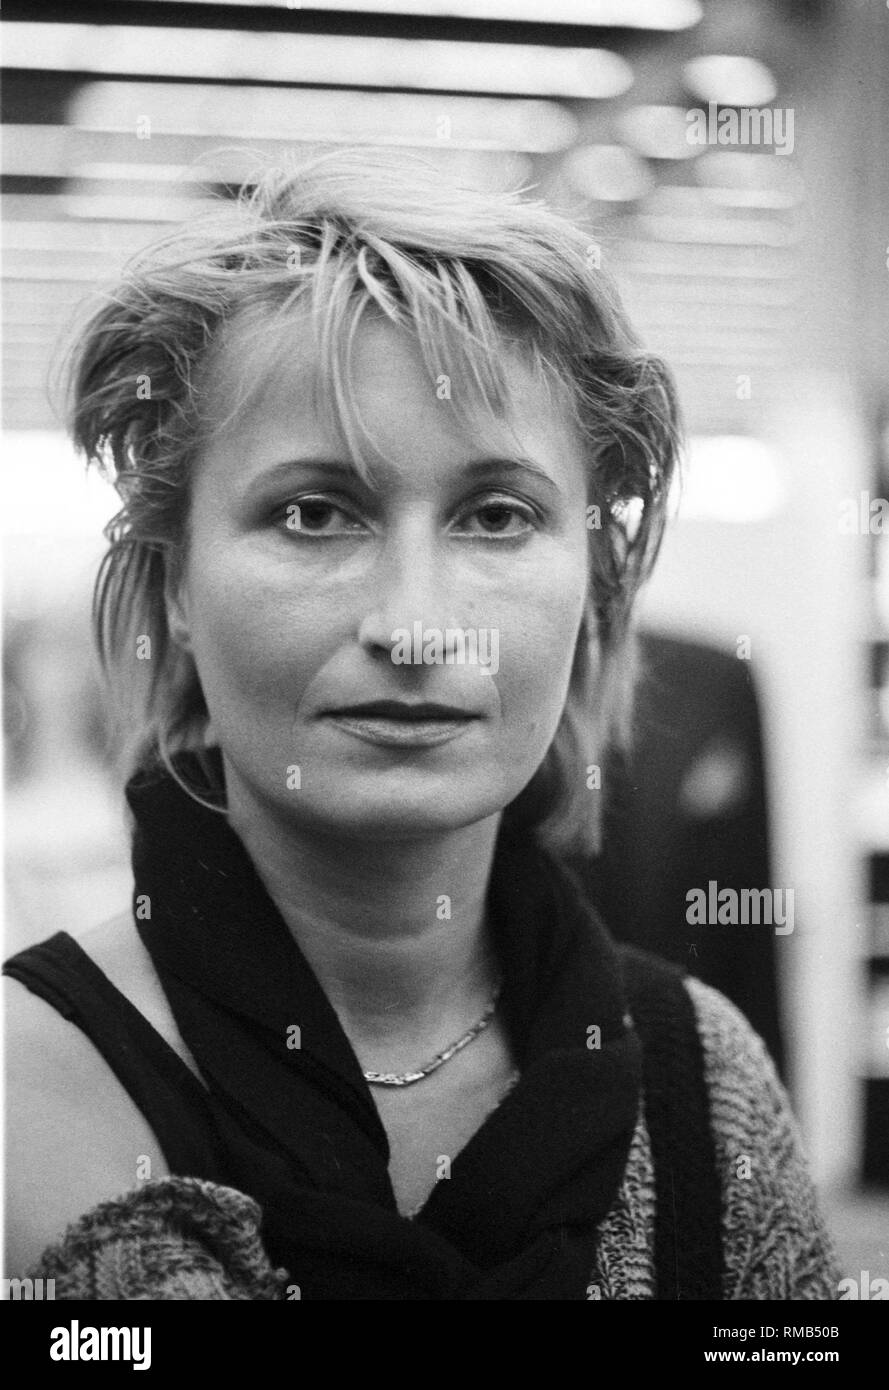 Elfriede Jelinek (photo) has been named playwright of the year at the Muehlheimer Theatertage with her play 'Macht nichts'. In her work the author examines the continuation of Nazi structures in the thinking and feeling of the people in the present age. The prize is endowed with 10,000 euros. Stock Photo